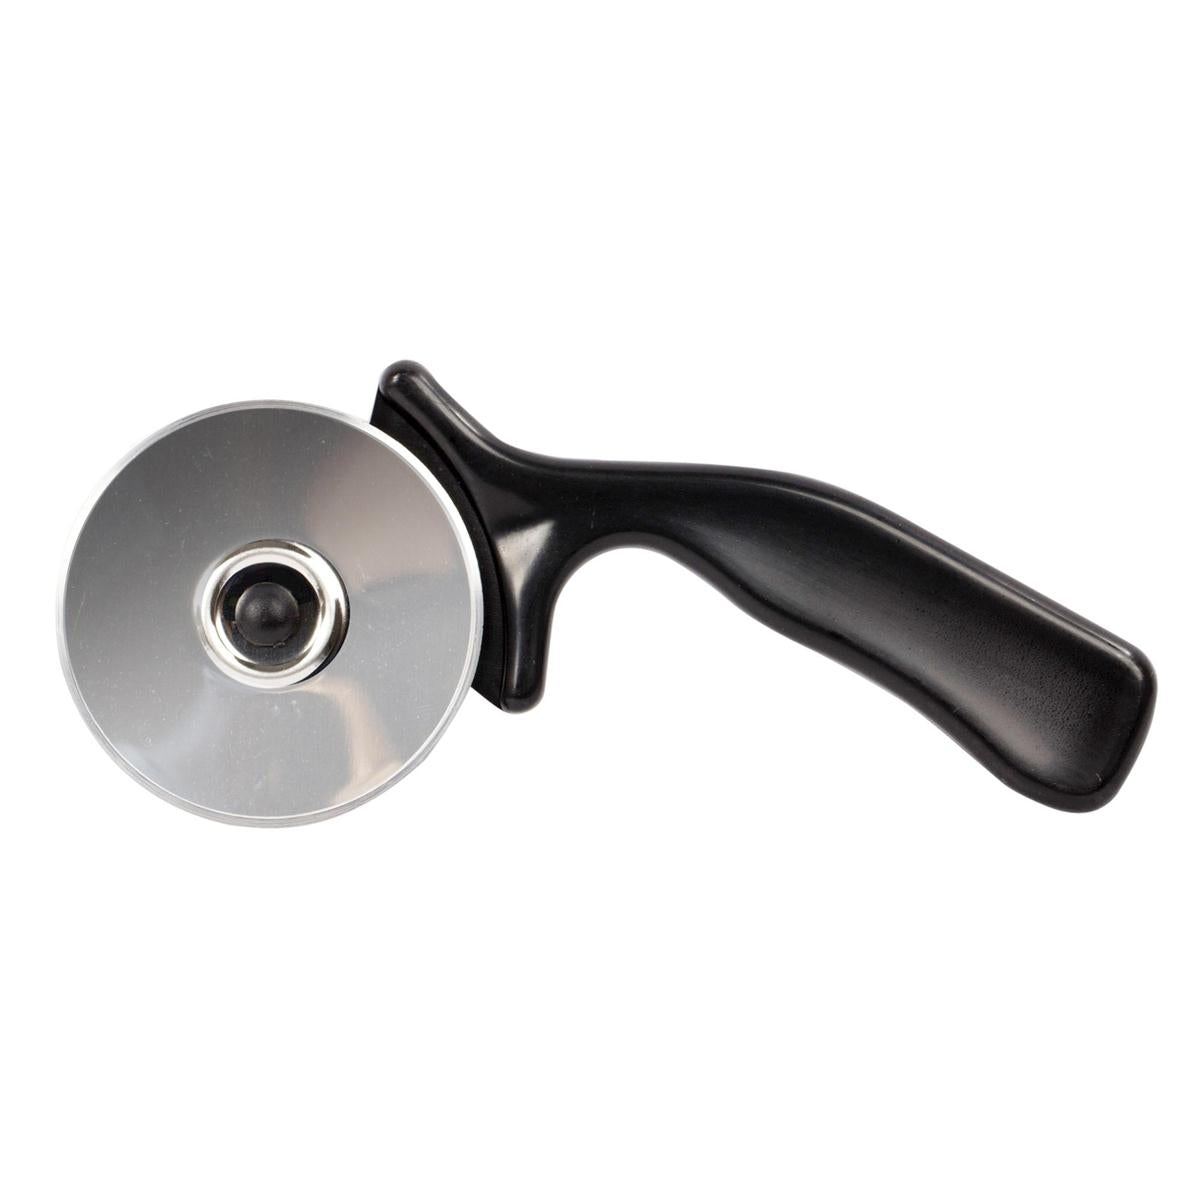 Luciano Pizza Cutter with Plastic Handle